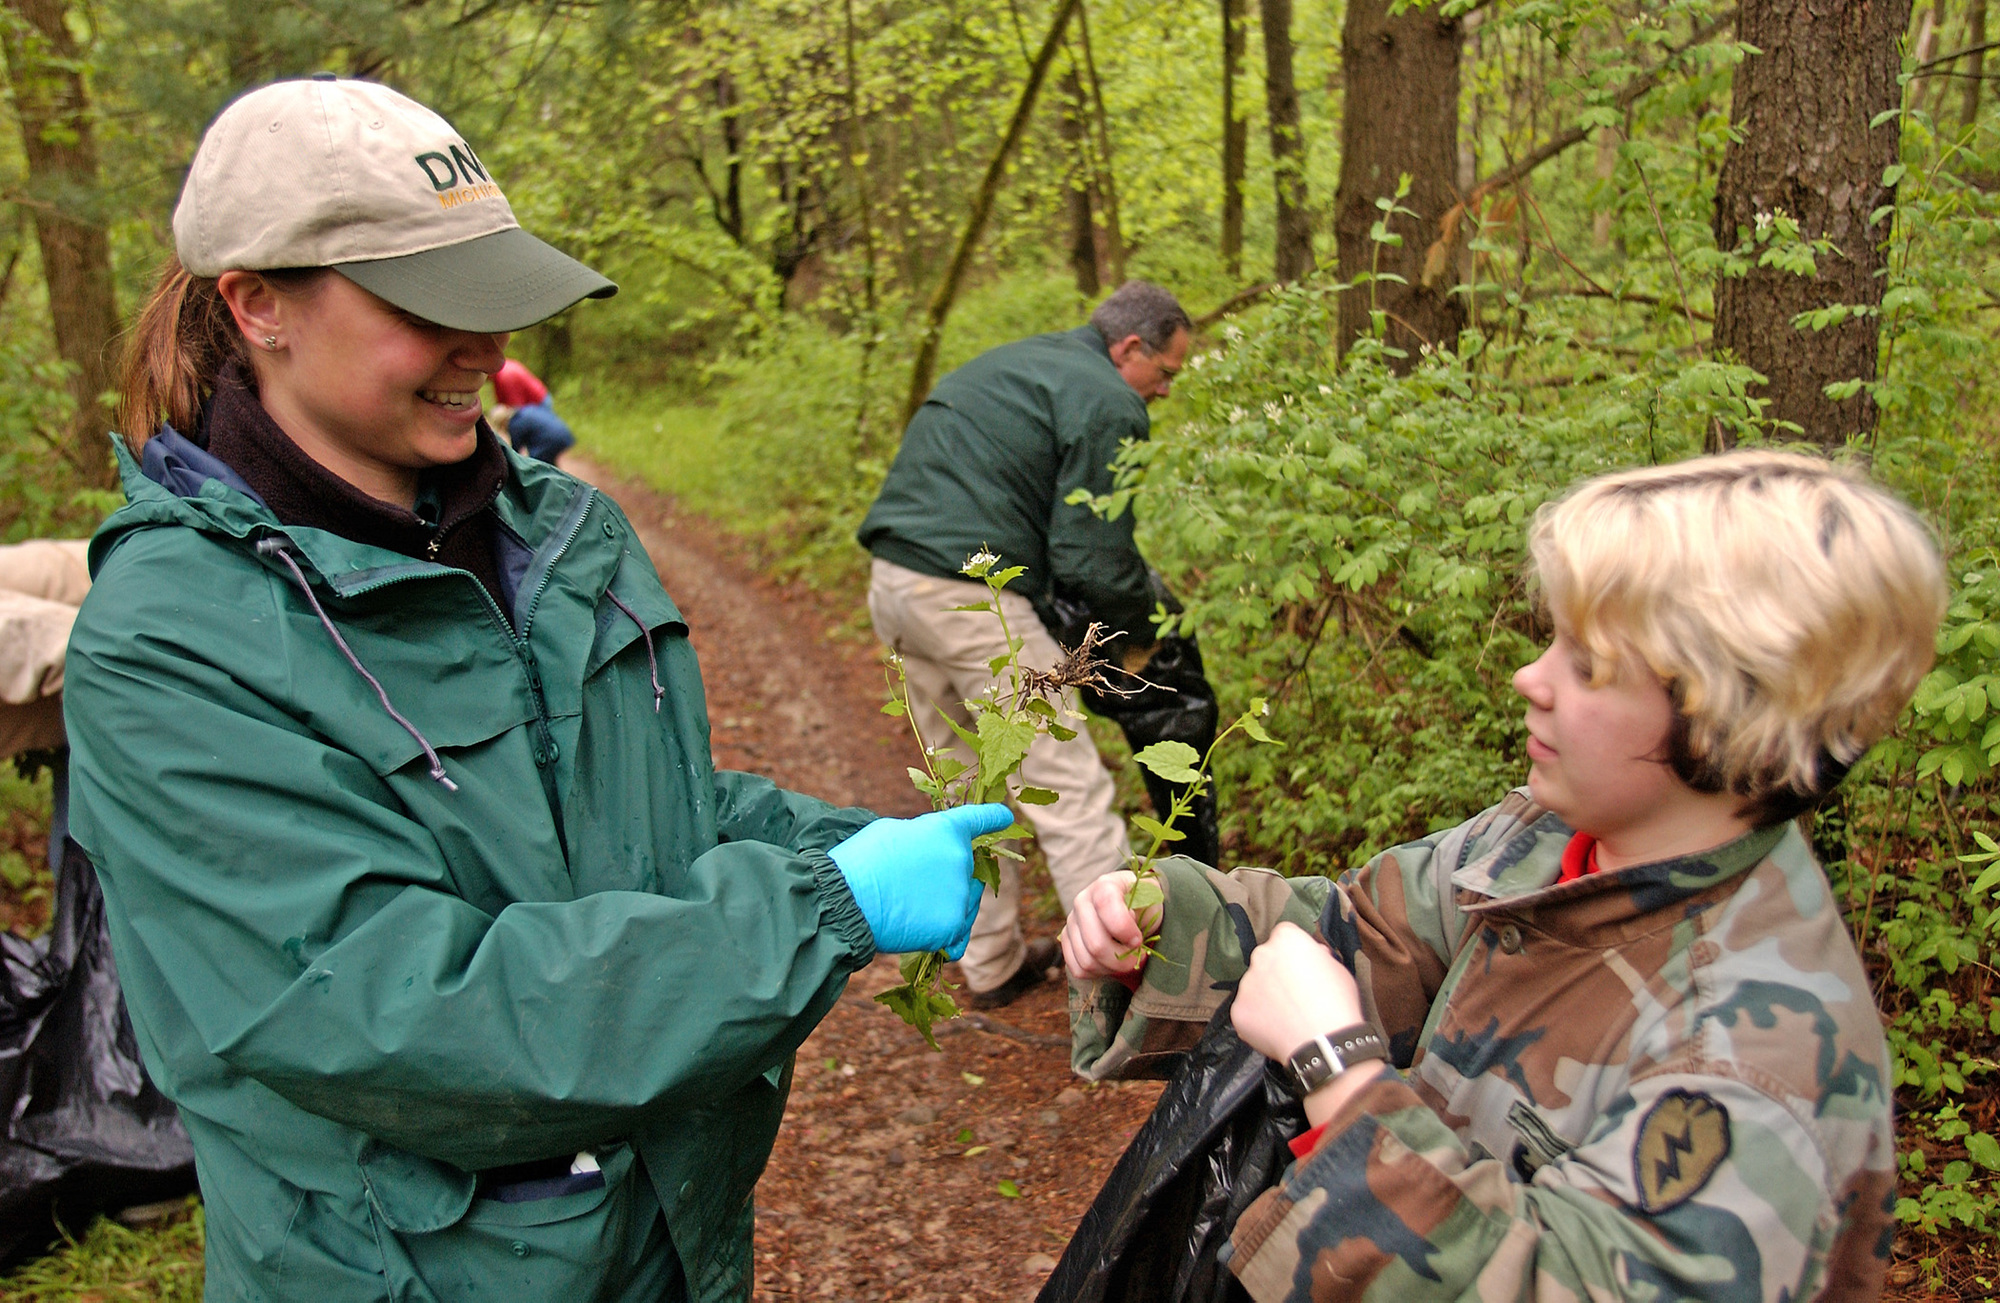 Volunteers engaged in invasive plant removal at the Bald Mountain Recreation Area, near Lake Orion, Michigan.